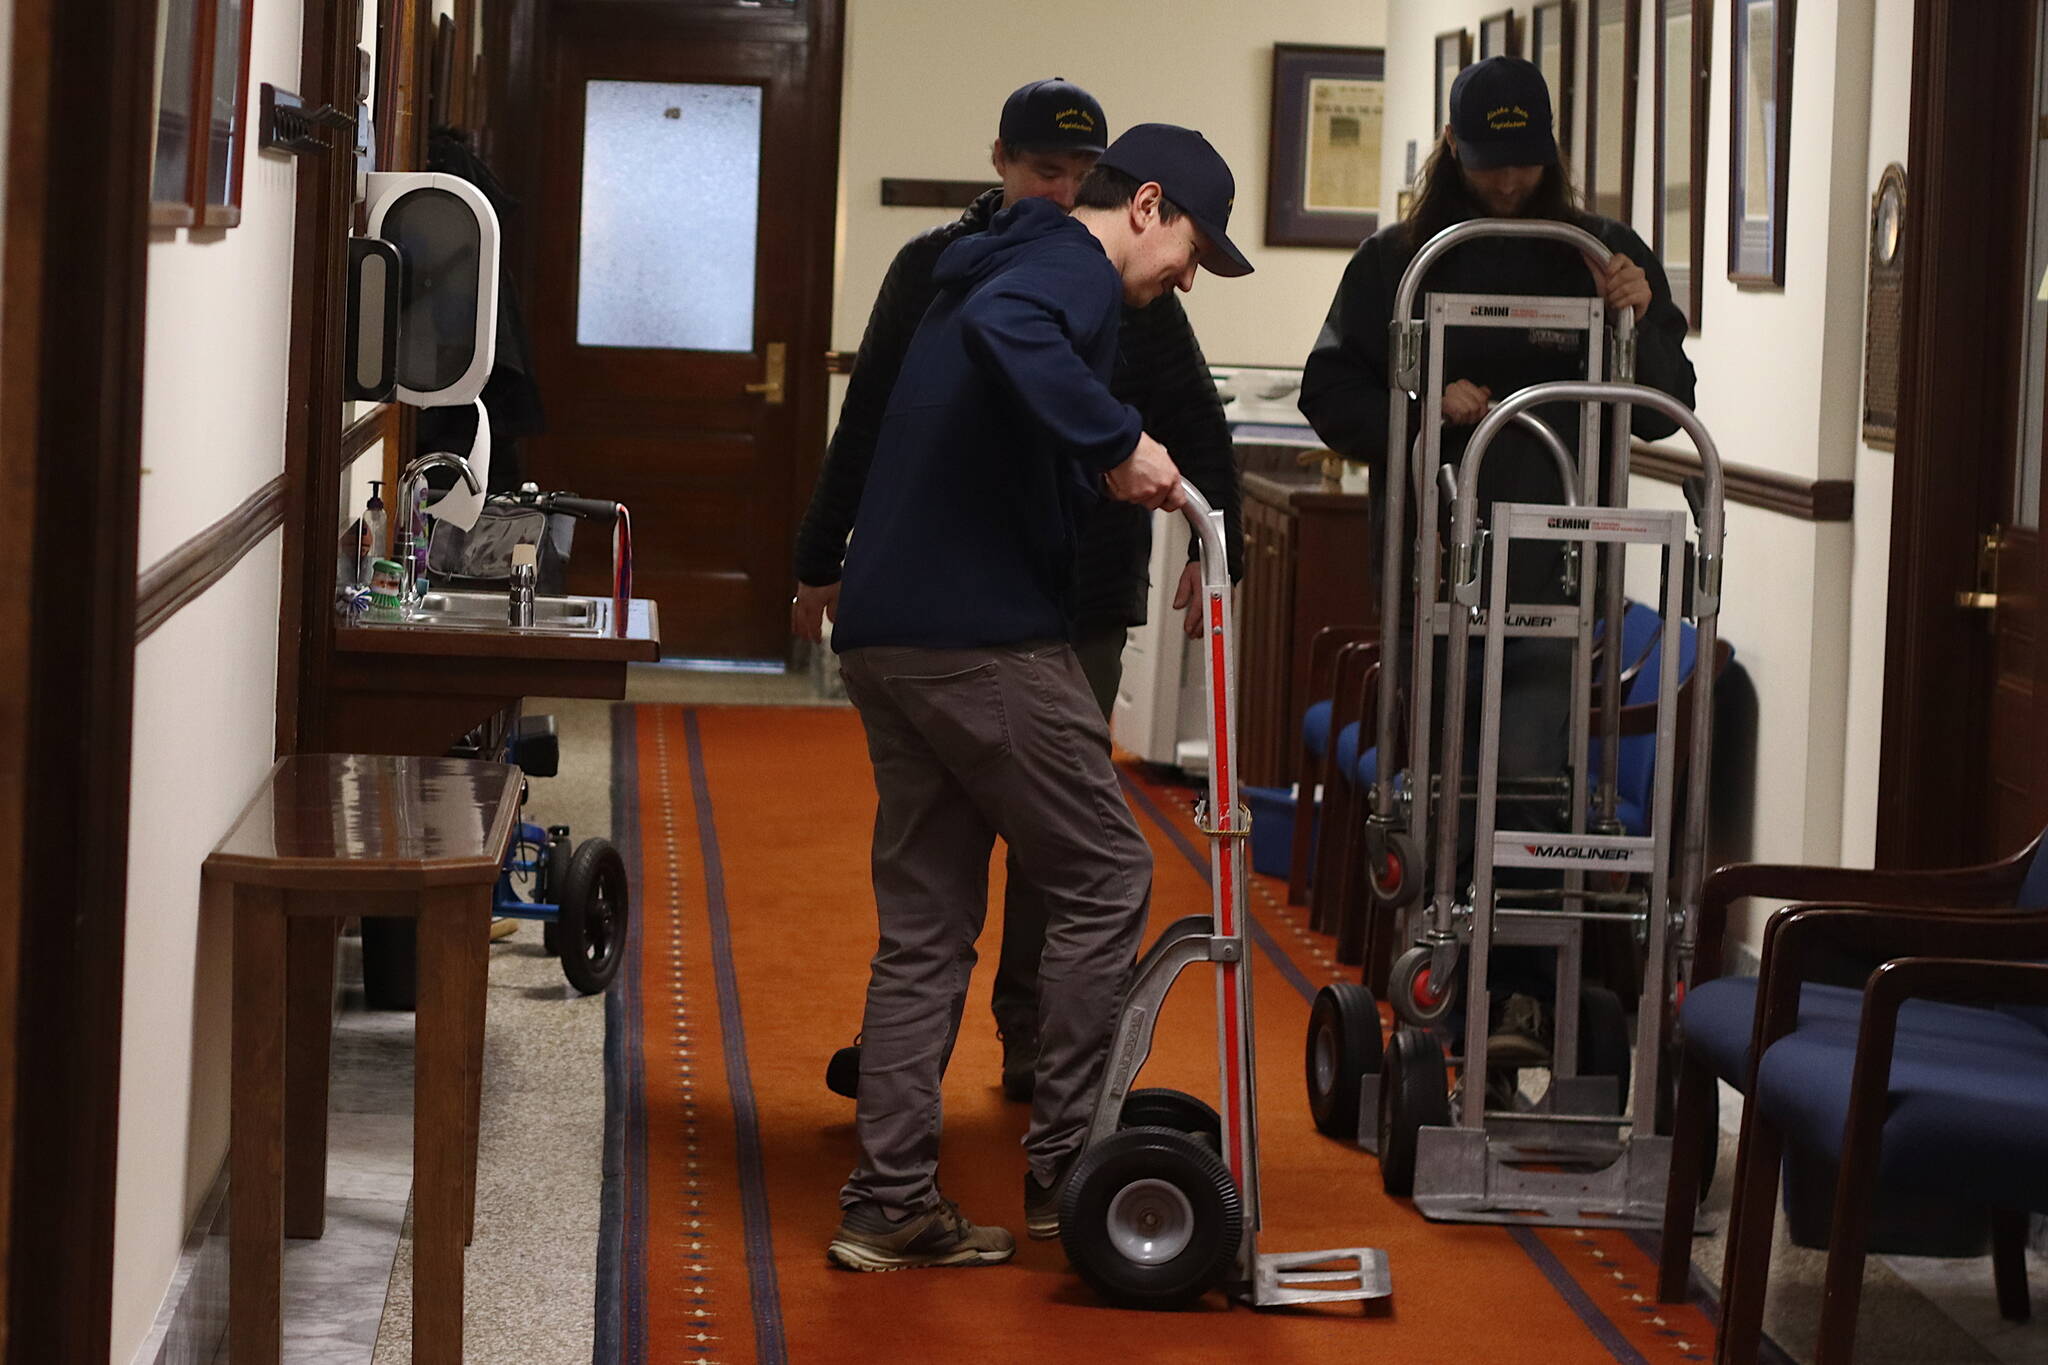 Logistics employees push hand trucks down a hallway at the Alaska State Capitol on Friday after placing chairs in the Senate chamber. (Mark Sabbatini / Juneau Empire)